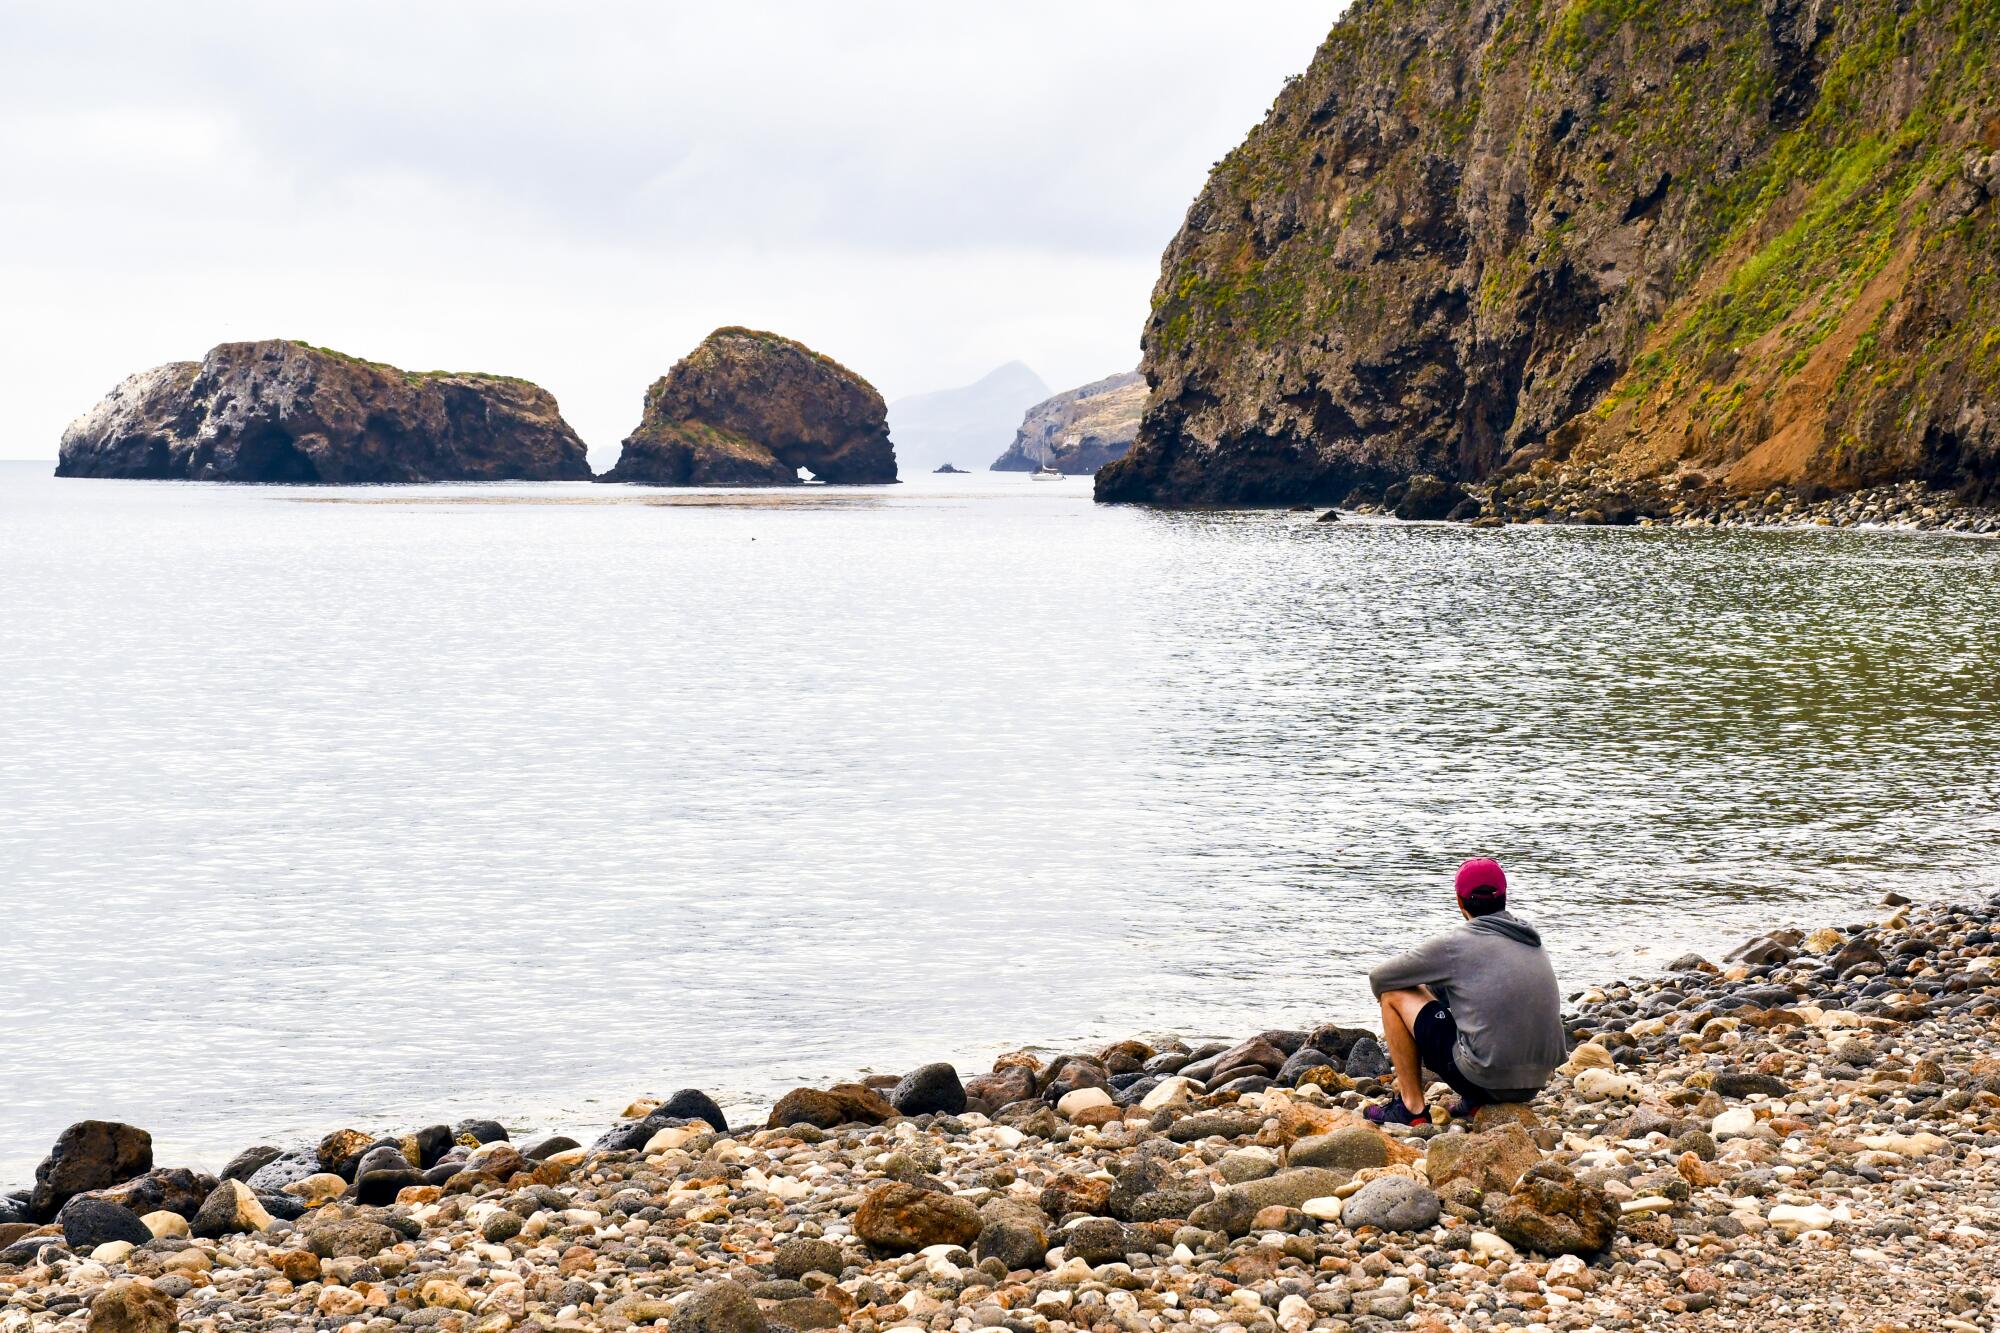 A visitor takes in Scorpion Anchorage on Santa Cruz Island in Channel Islands National Park.